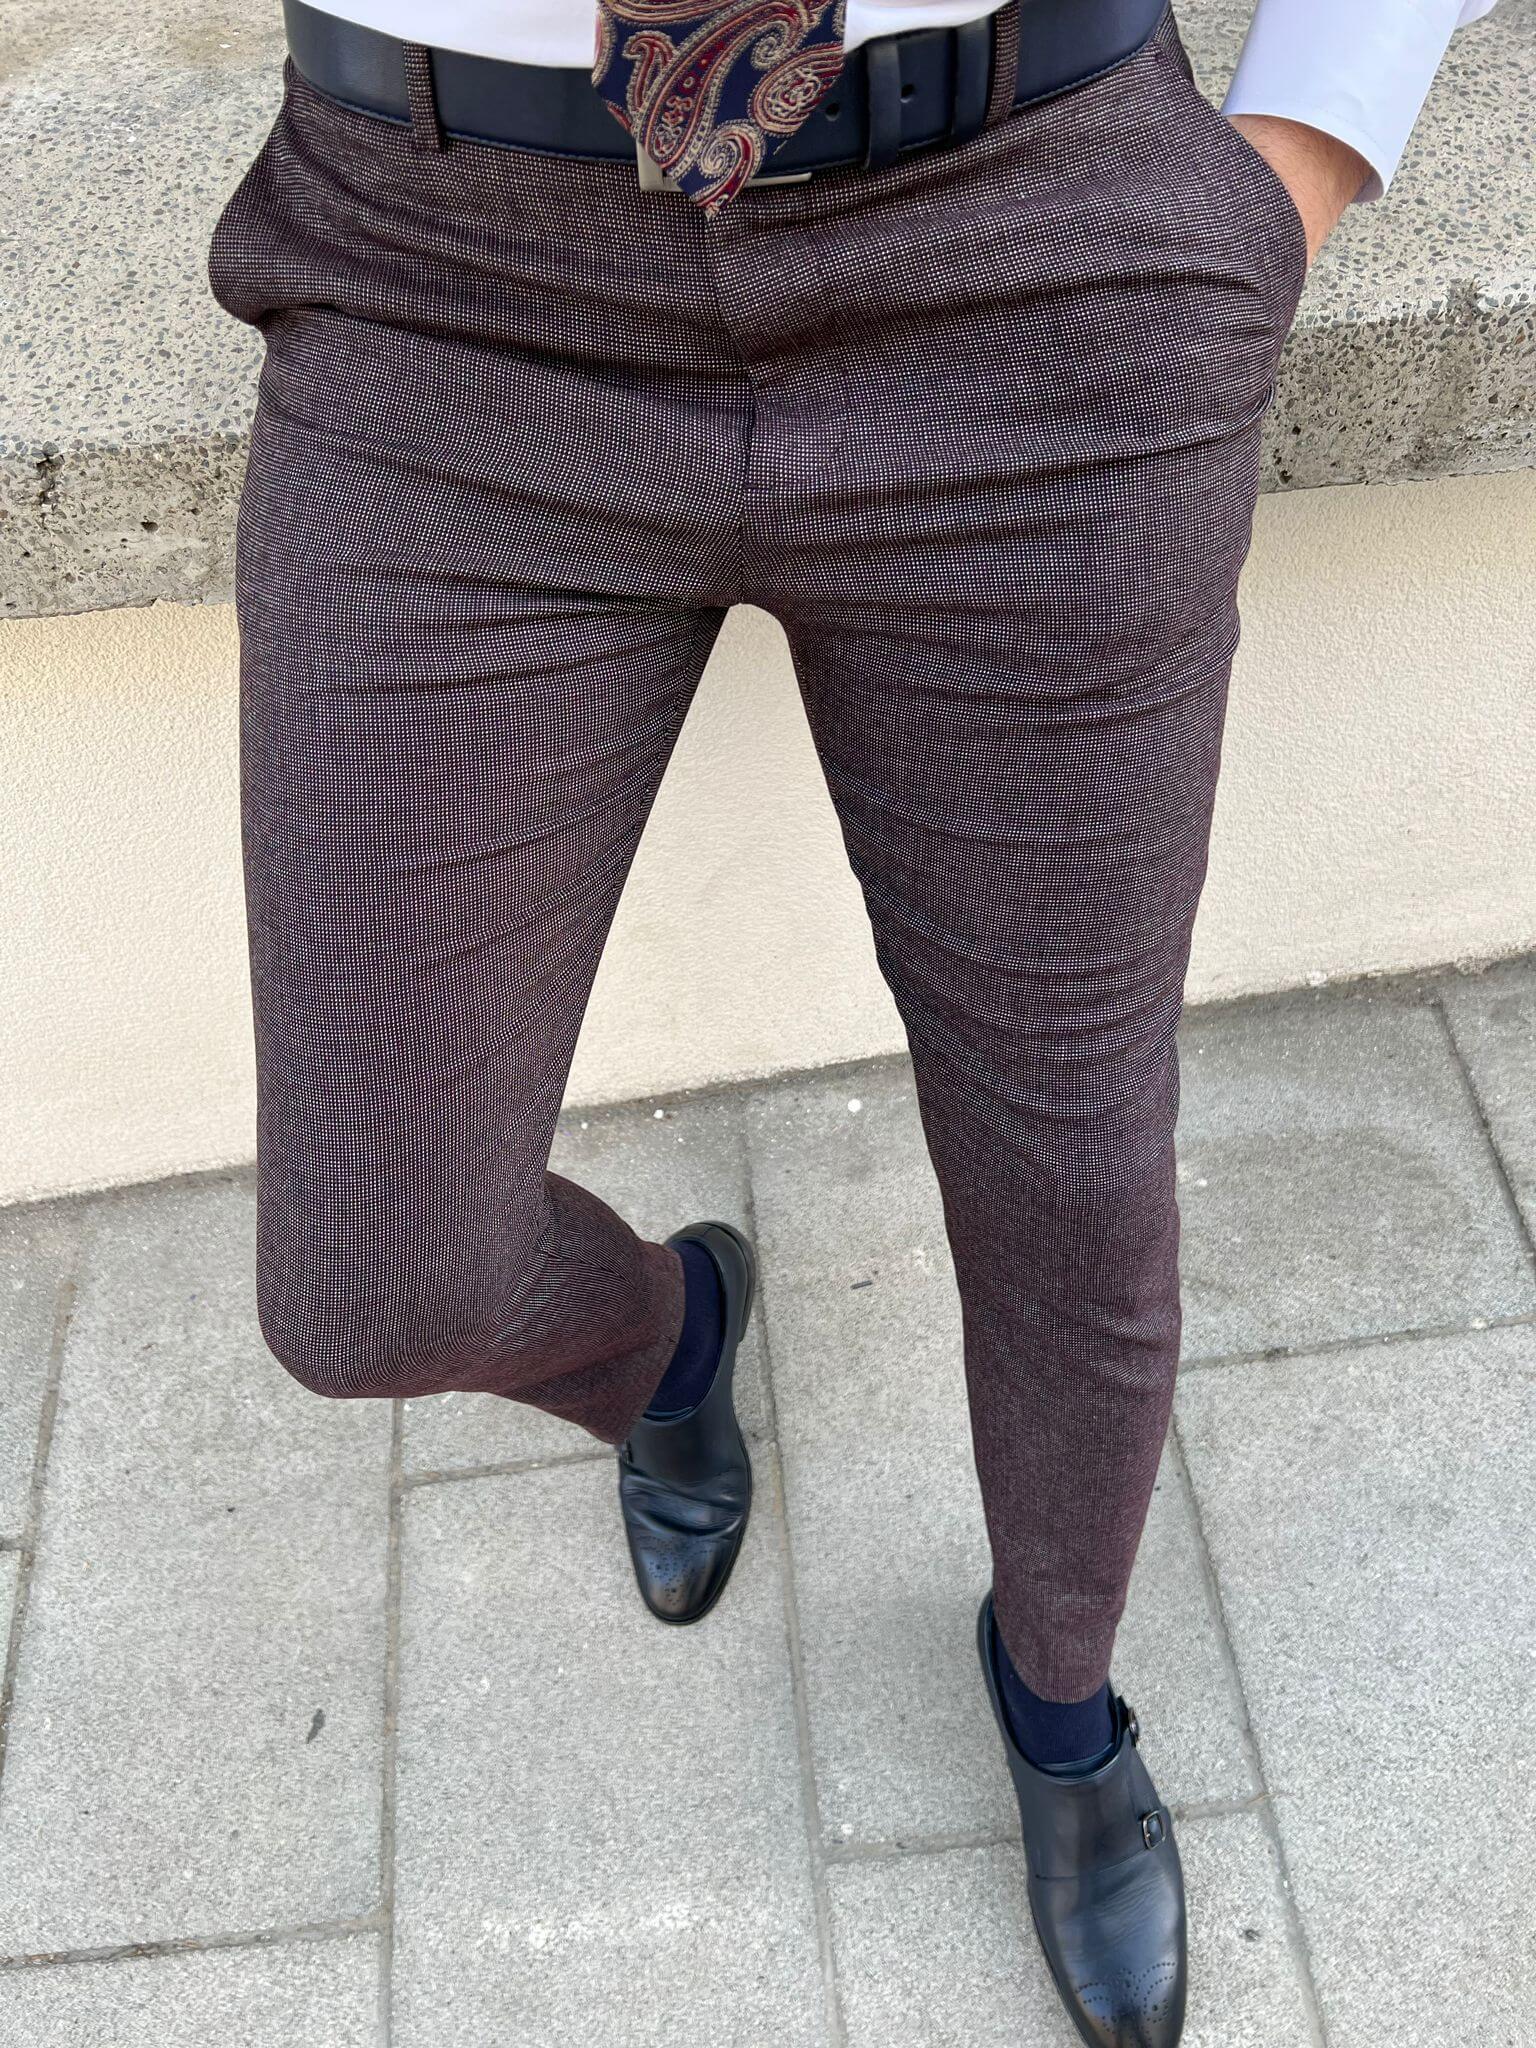 A pair of stylish patterned claret red pants showcasing a unique design